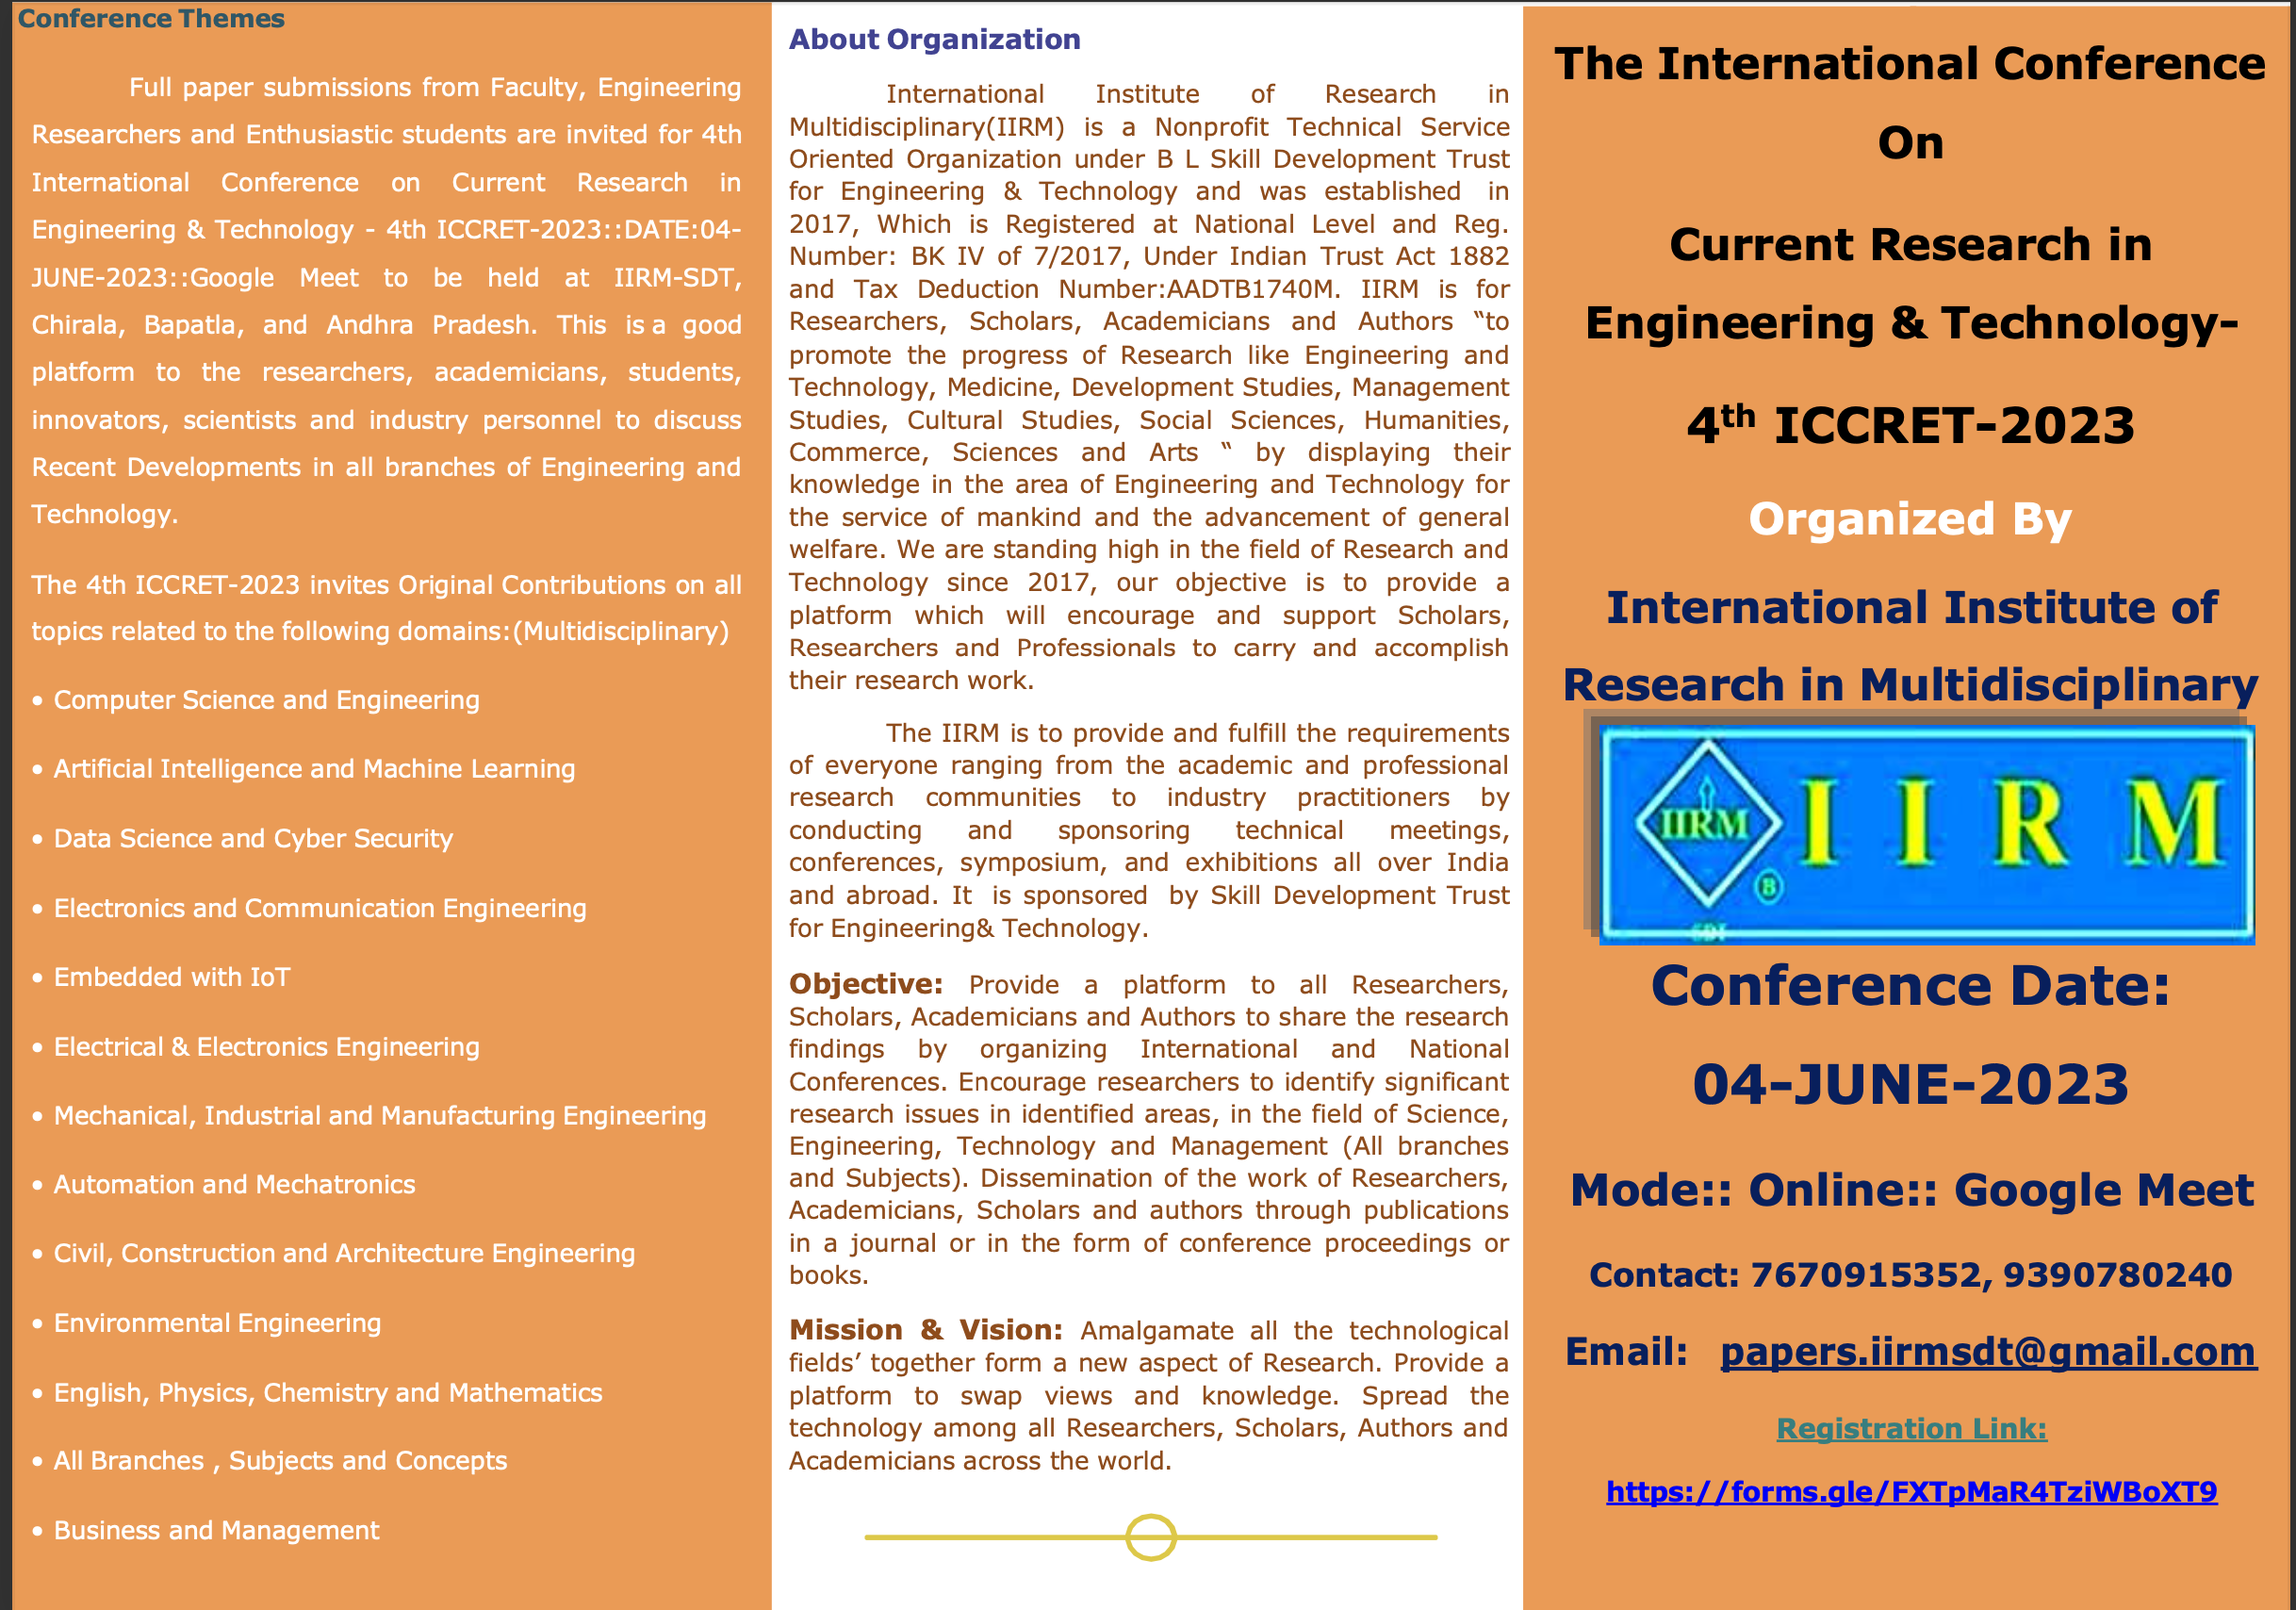 4th International Conference on Current Research in Engineering and Technology 4th ICCRET 2023